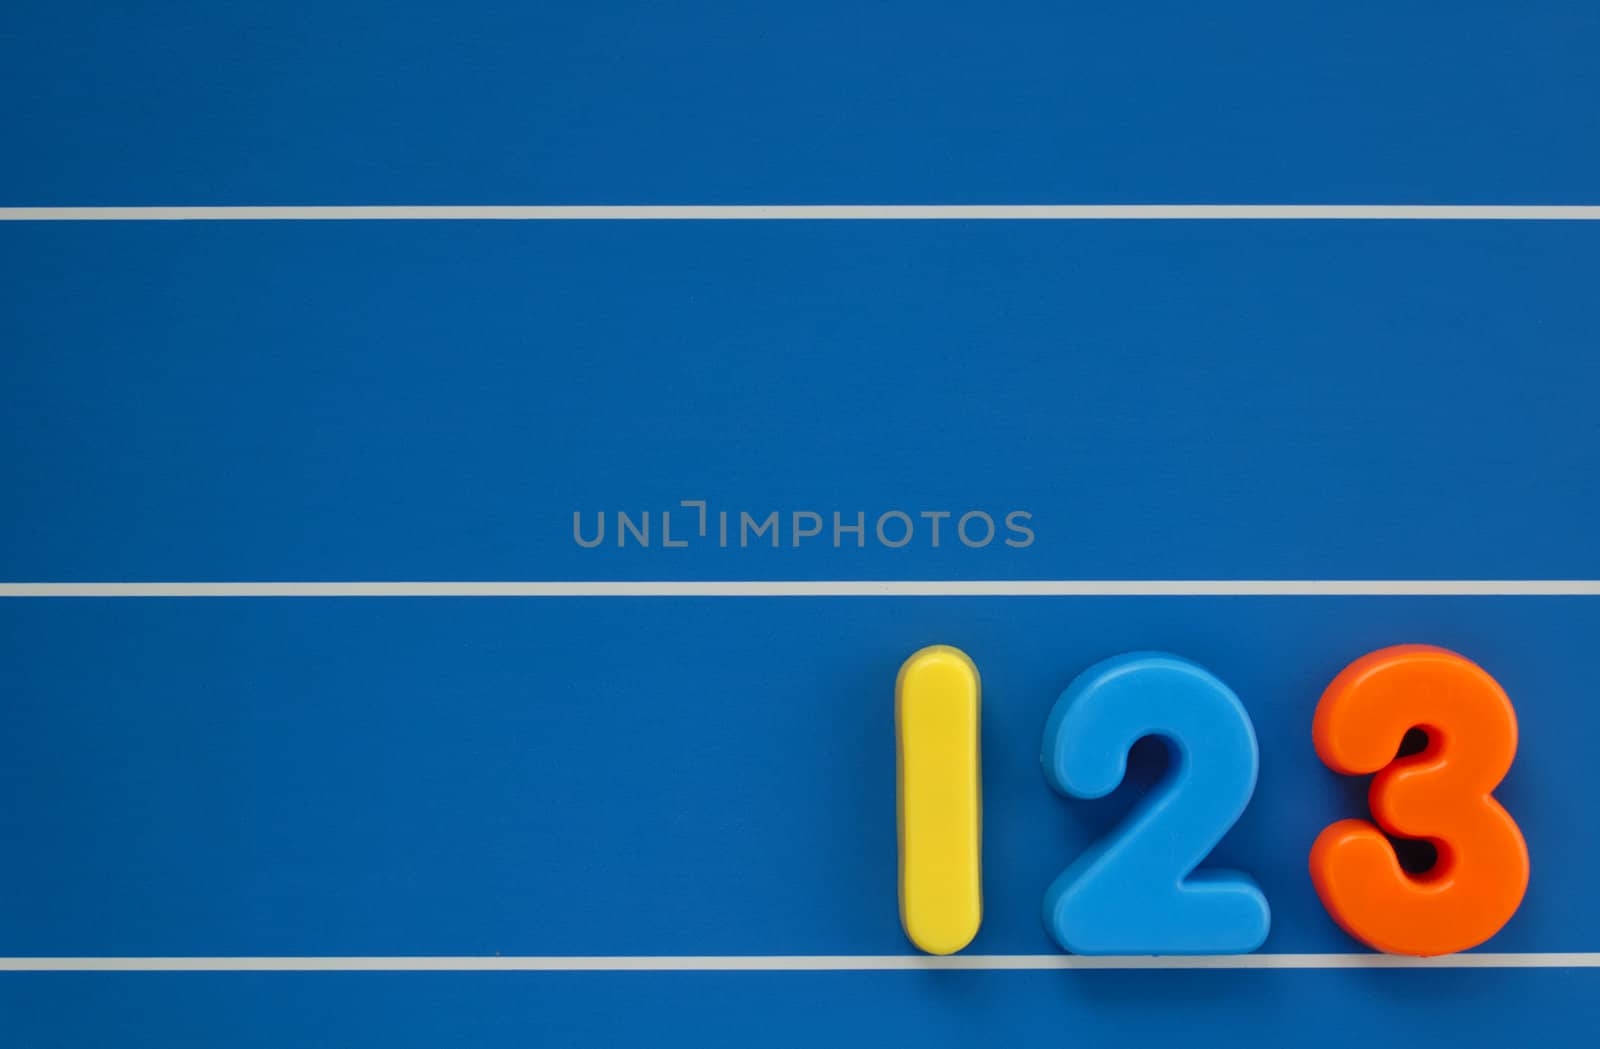 The numbers 1, 2 and 3 from a child's toy alphabet set, placed on a blue, lined background. Space for text elsewhere in the image.